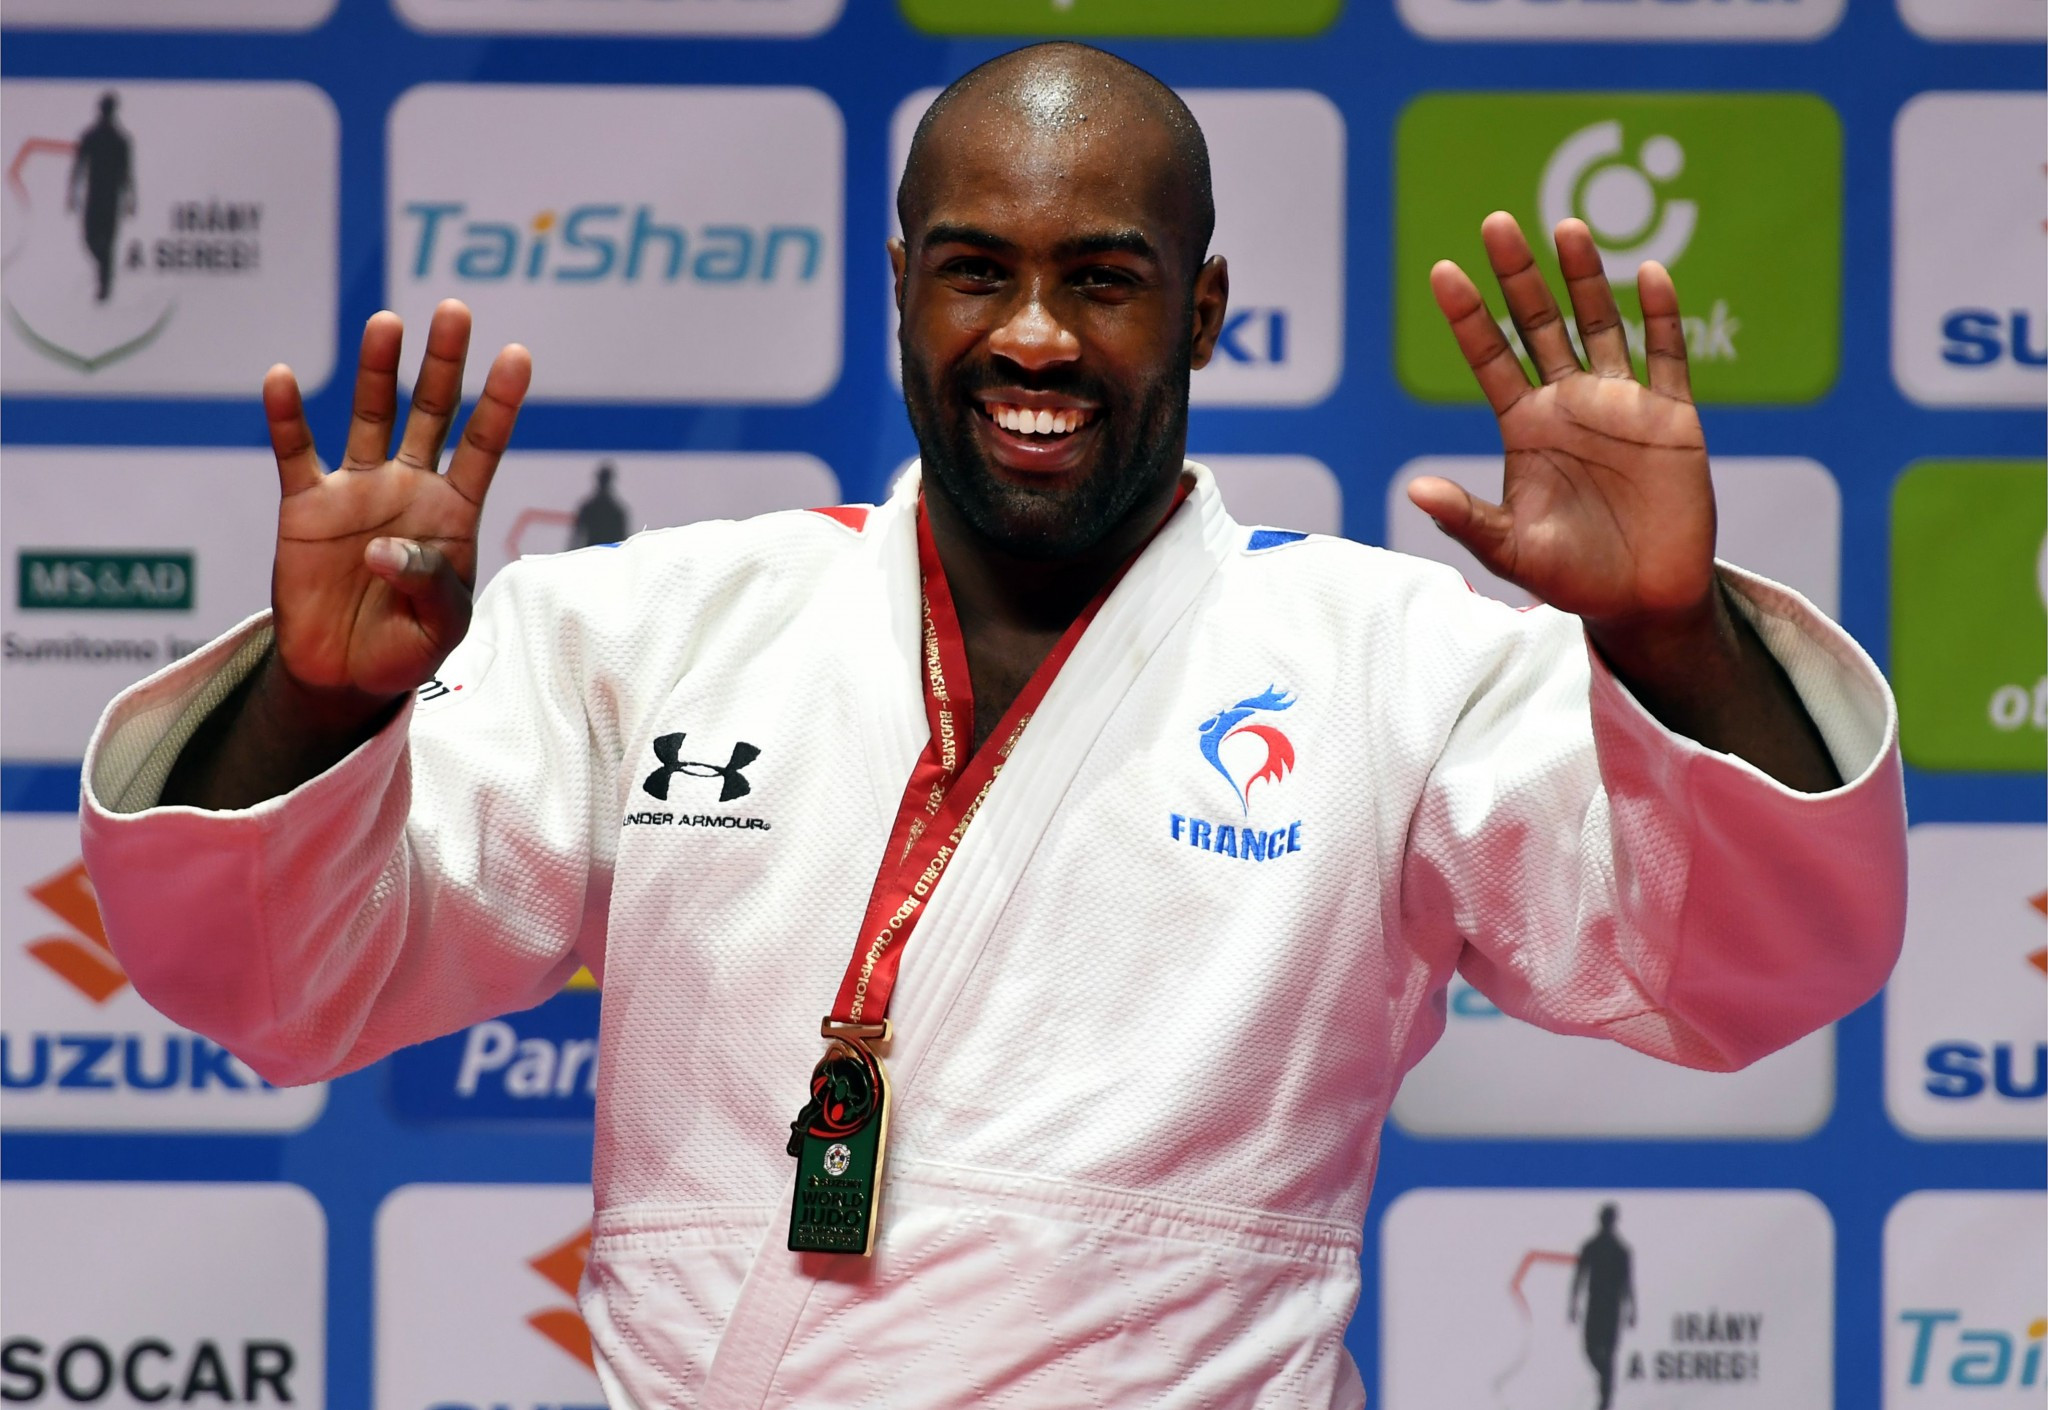 Riner secures ninth title and stretches winning streak to 134 matches at IJF World Championships